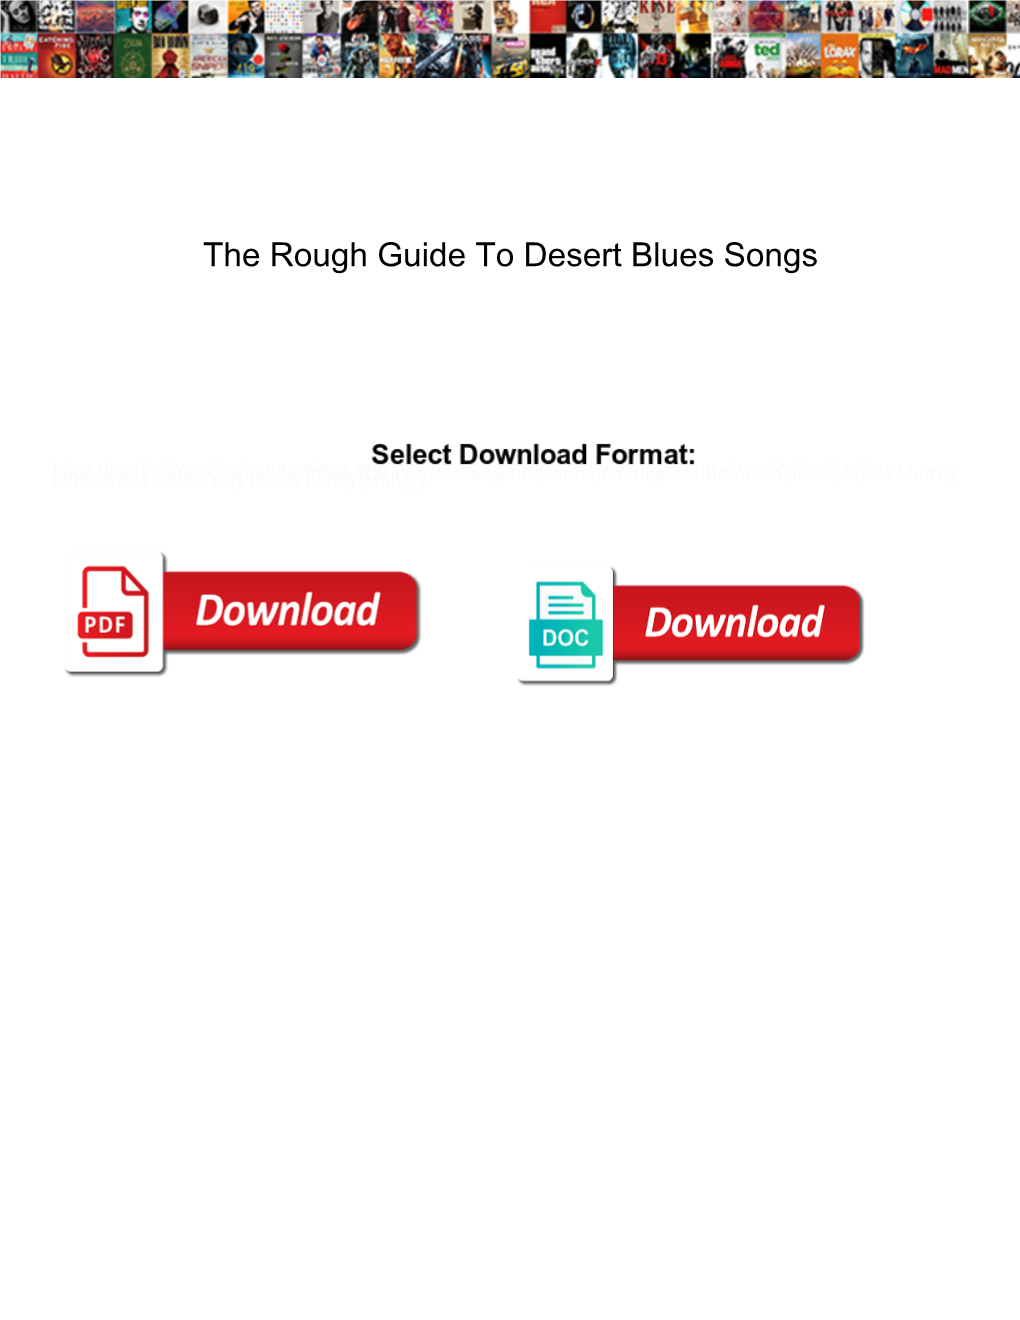 The Rough Guide to Desert Blues Songs